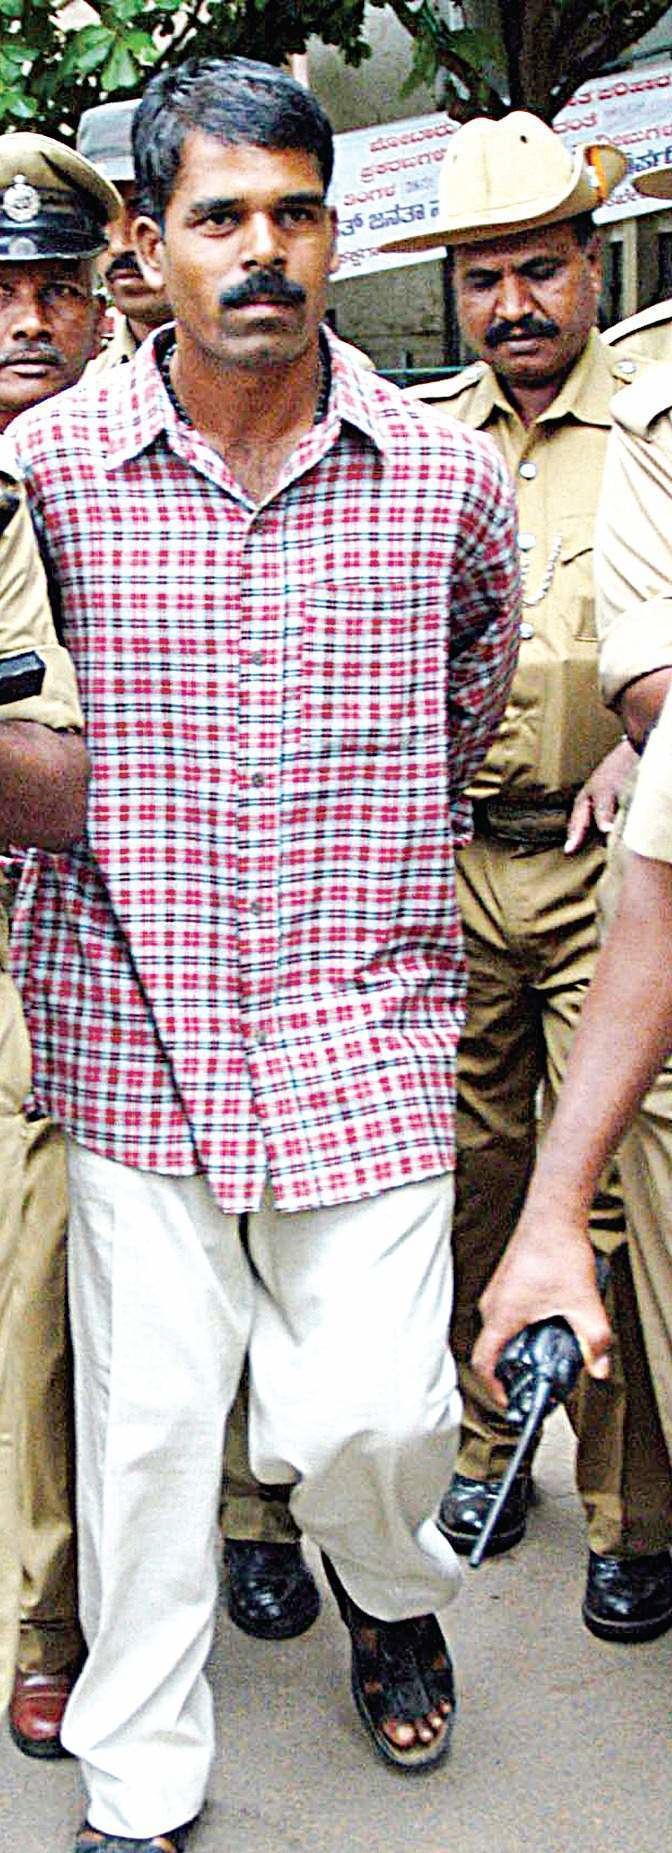 Umesh Reddy A rapistkiller who stalked the streets The New Indian Express